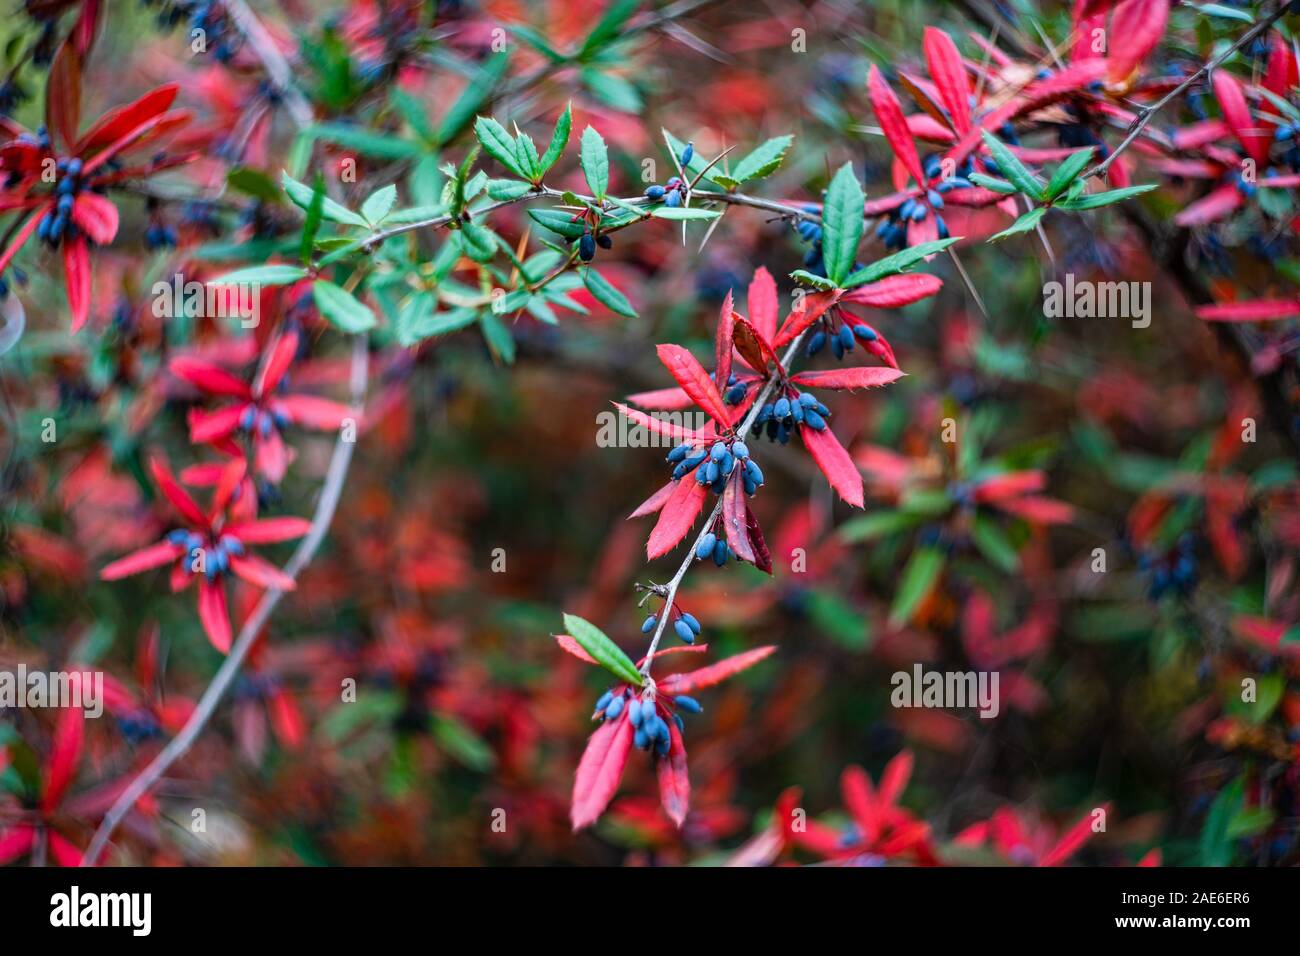 Closeup of autumn fruits of Barberry bush in park Stock Photo